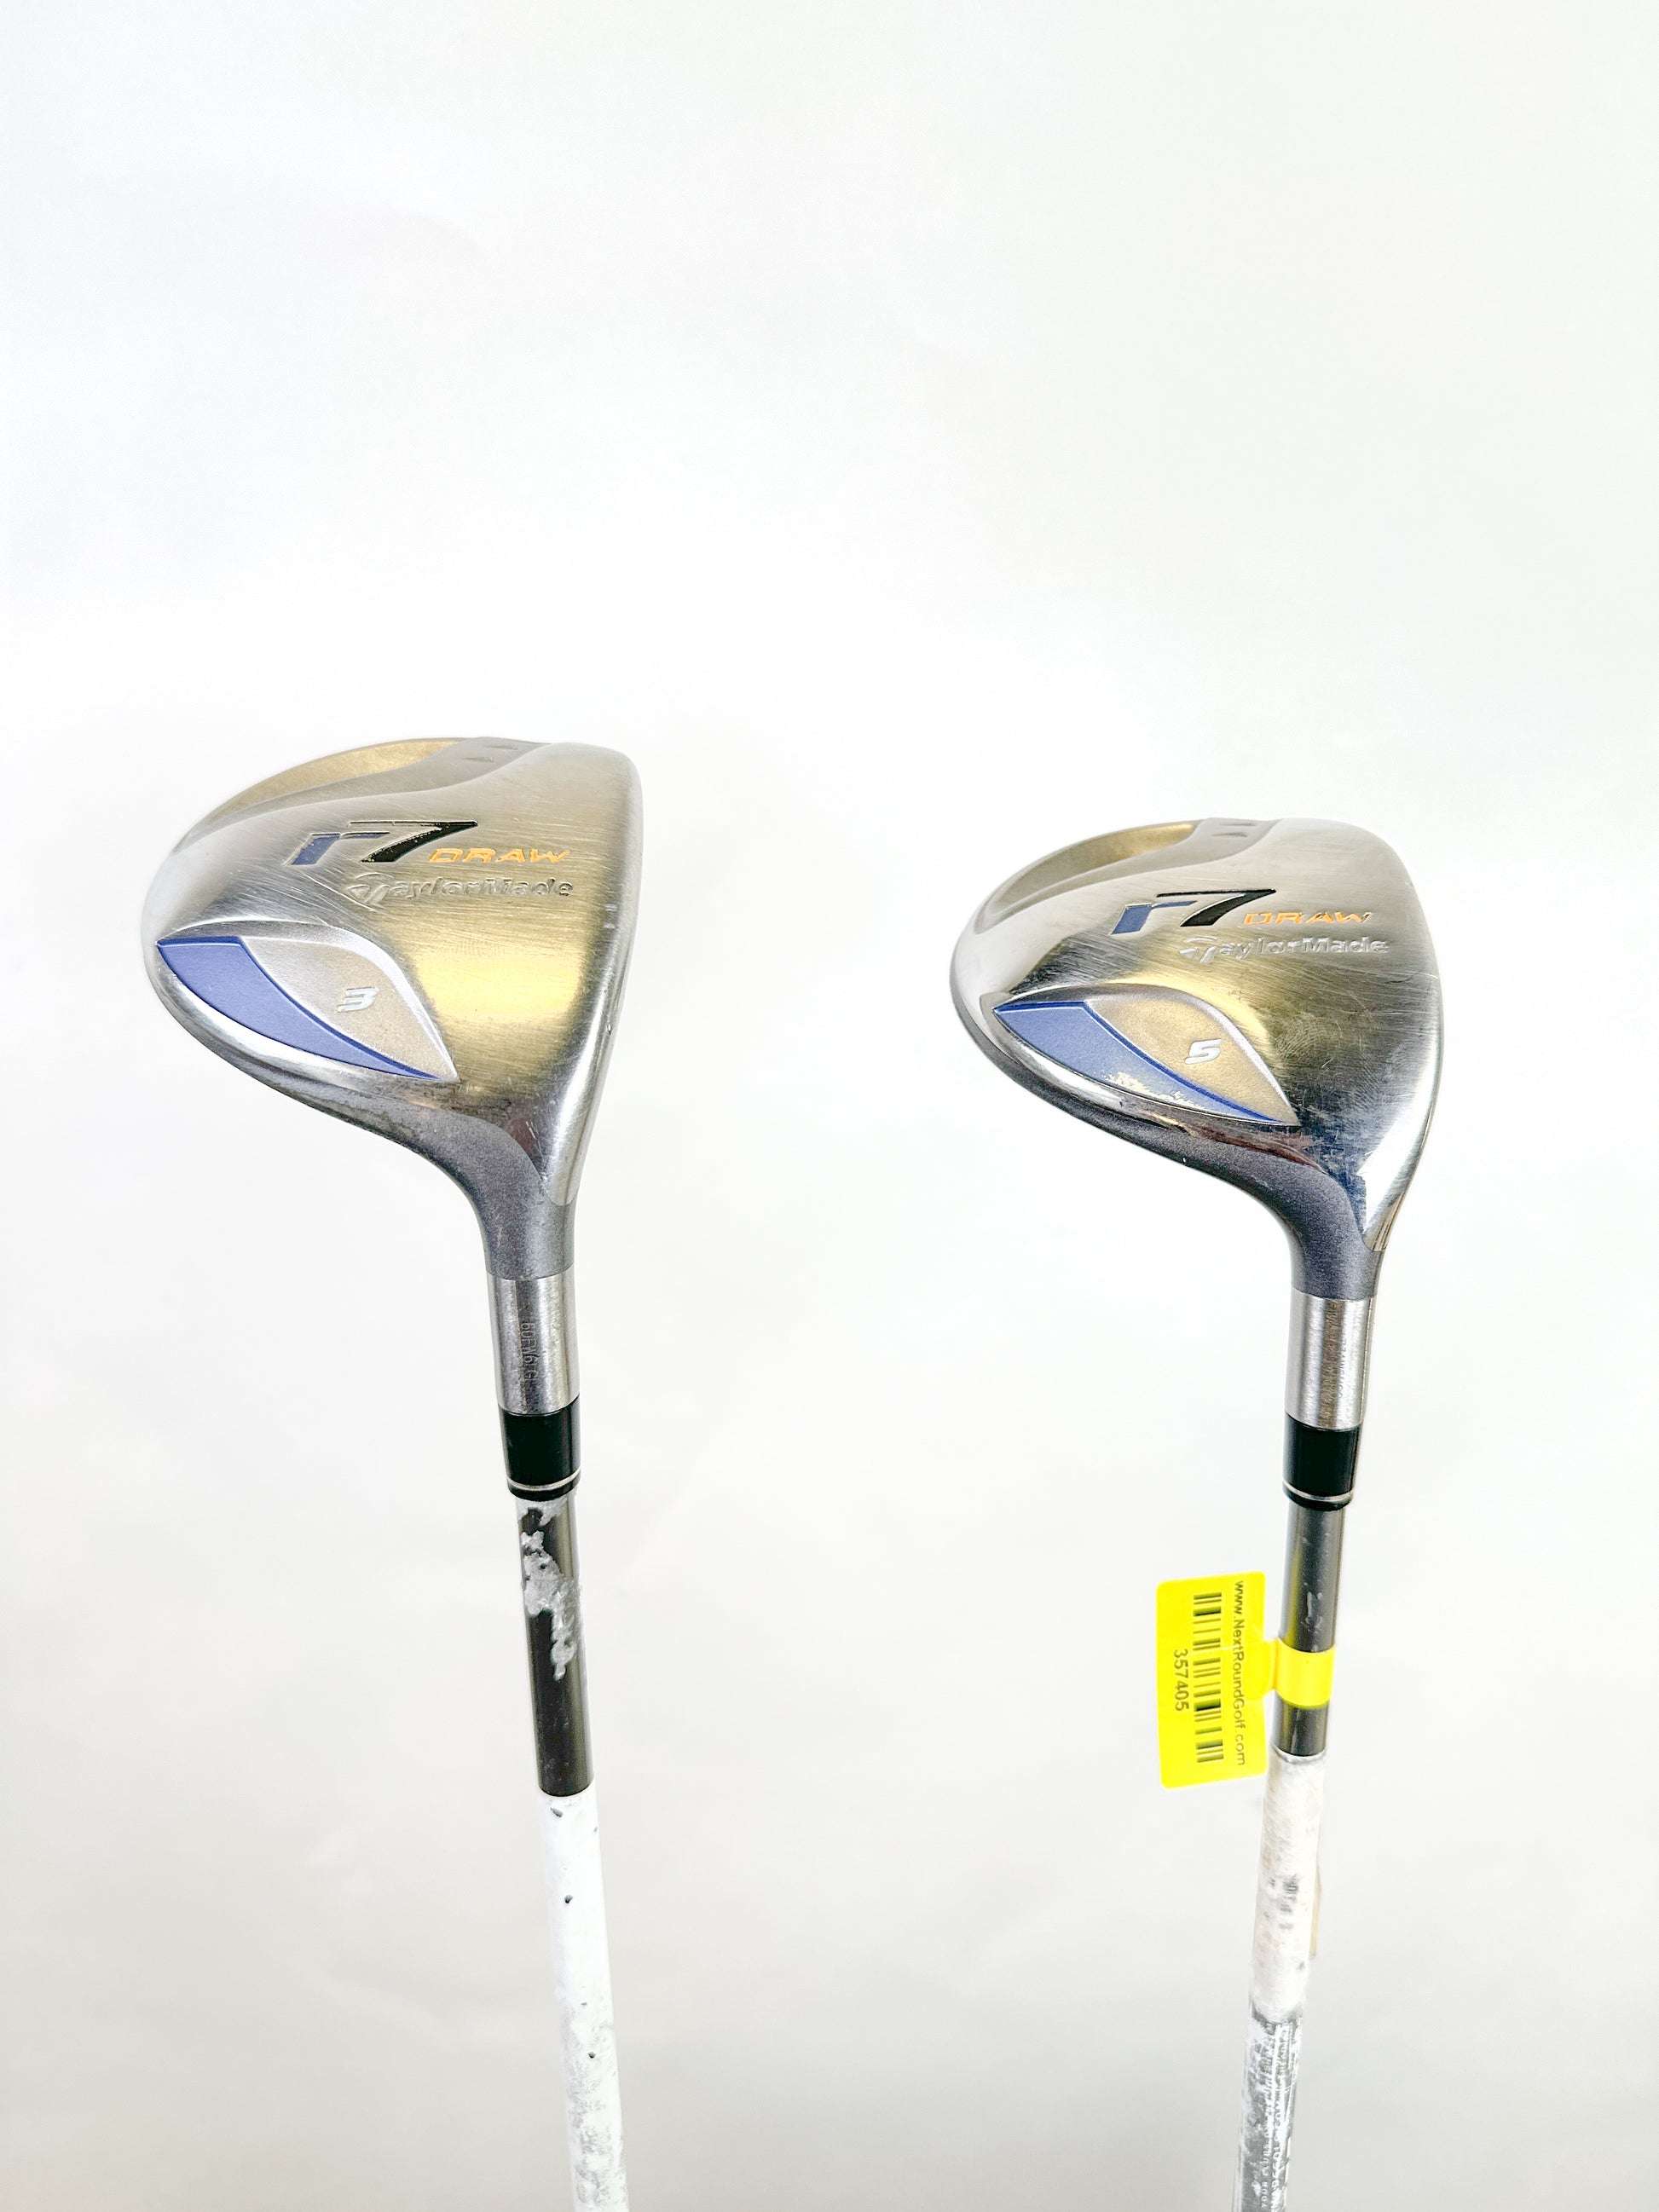 Used TaylorMade r7 Draw Wood Set - Right-Handed - 3, 5 - Ladies Flex-Next Round